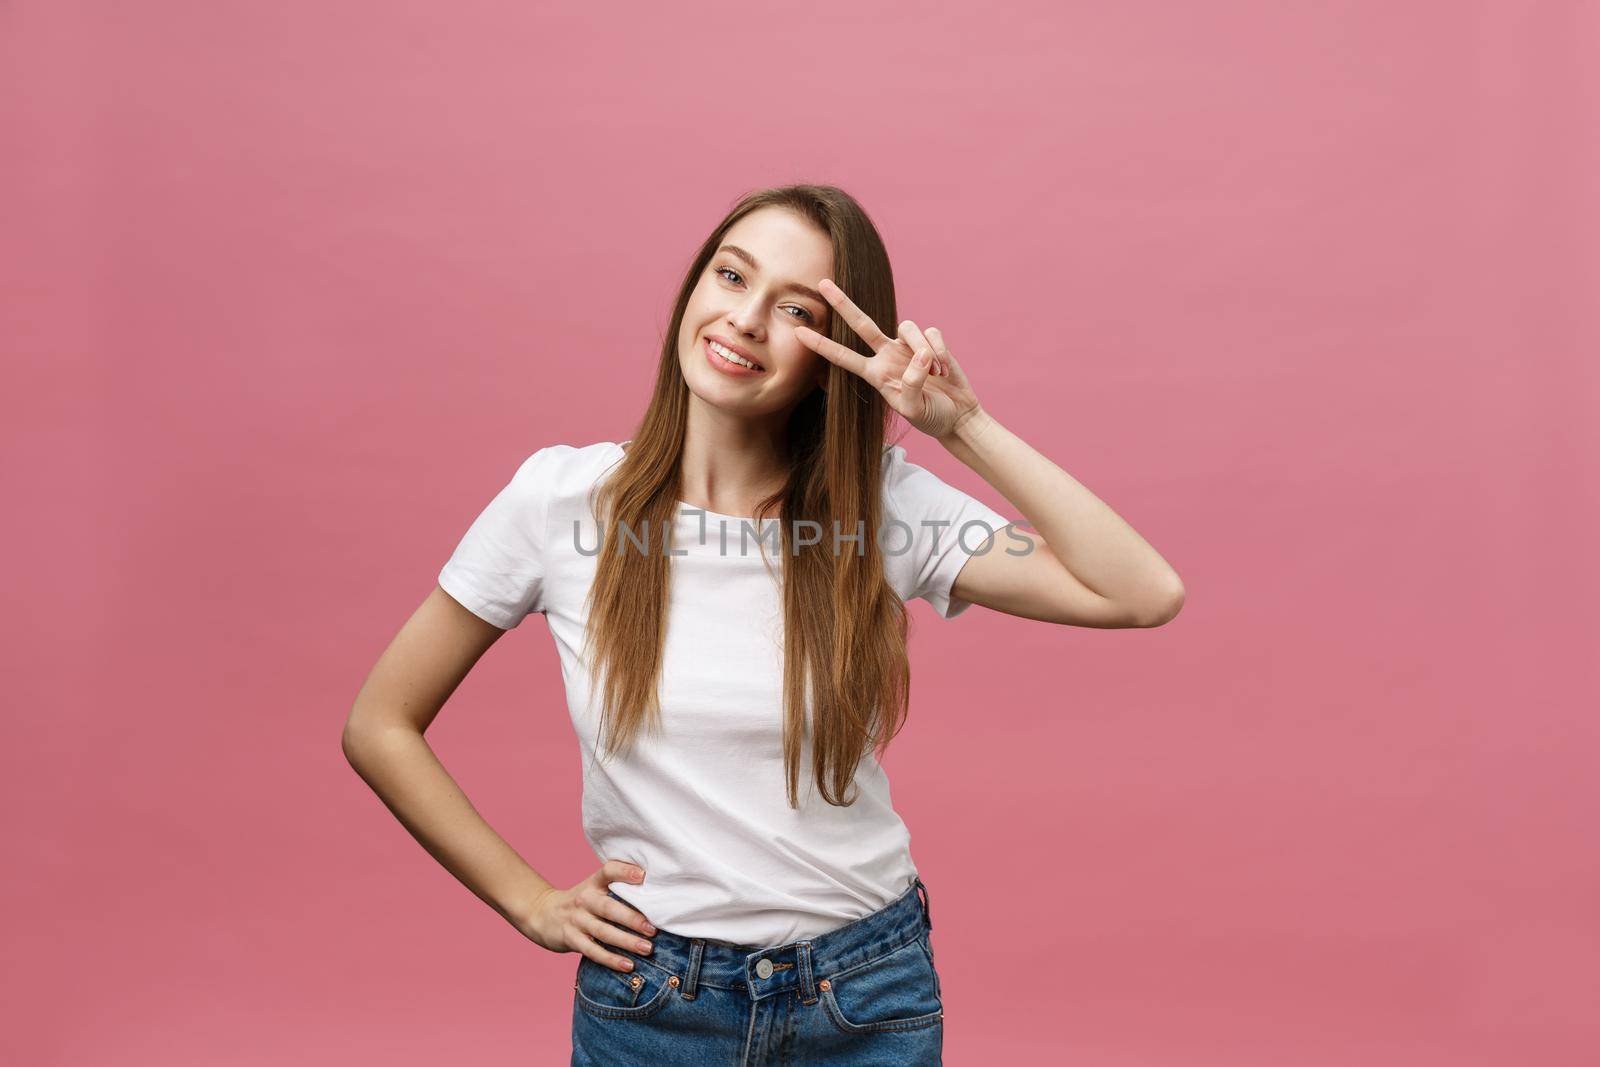 Portrait of a cheerful trendy woman showing two fingers sign over pink background.